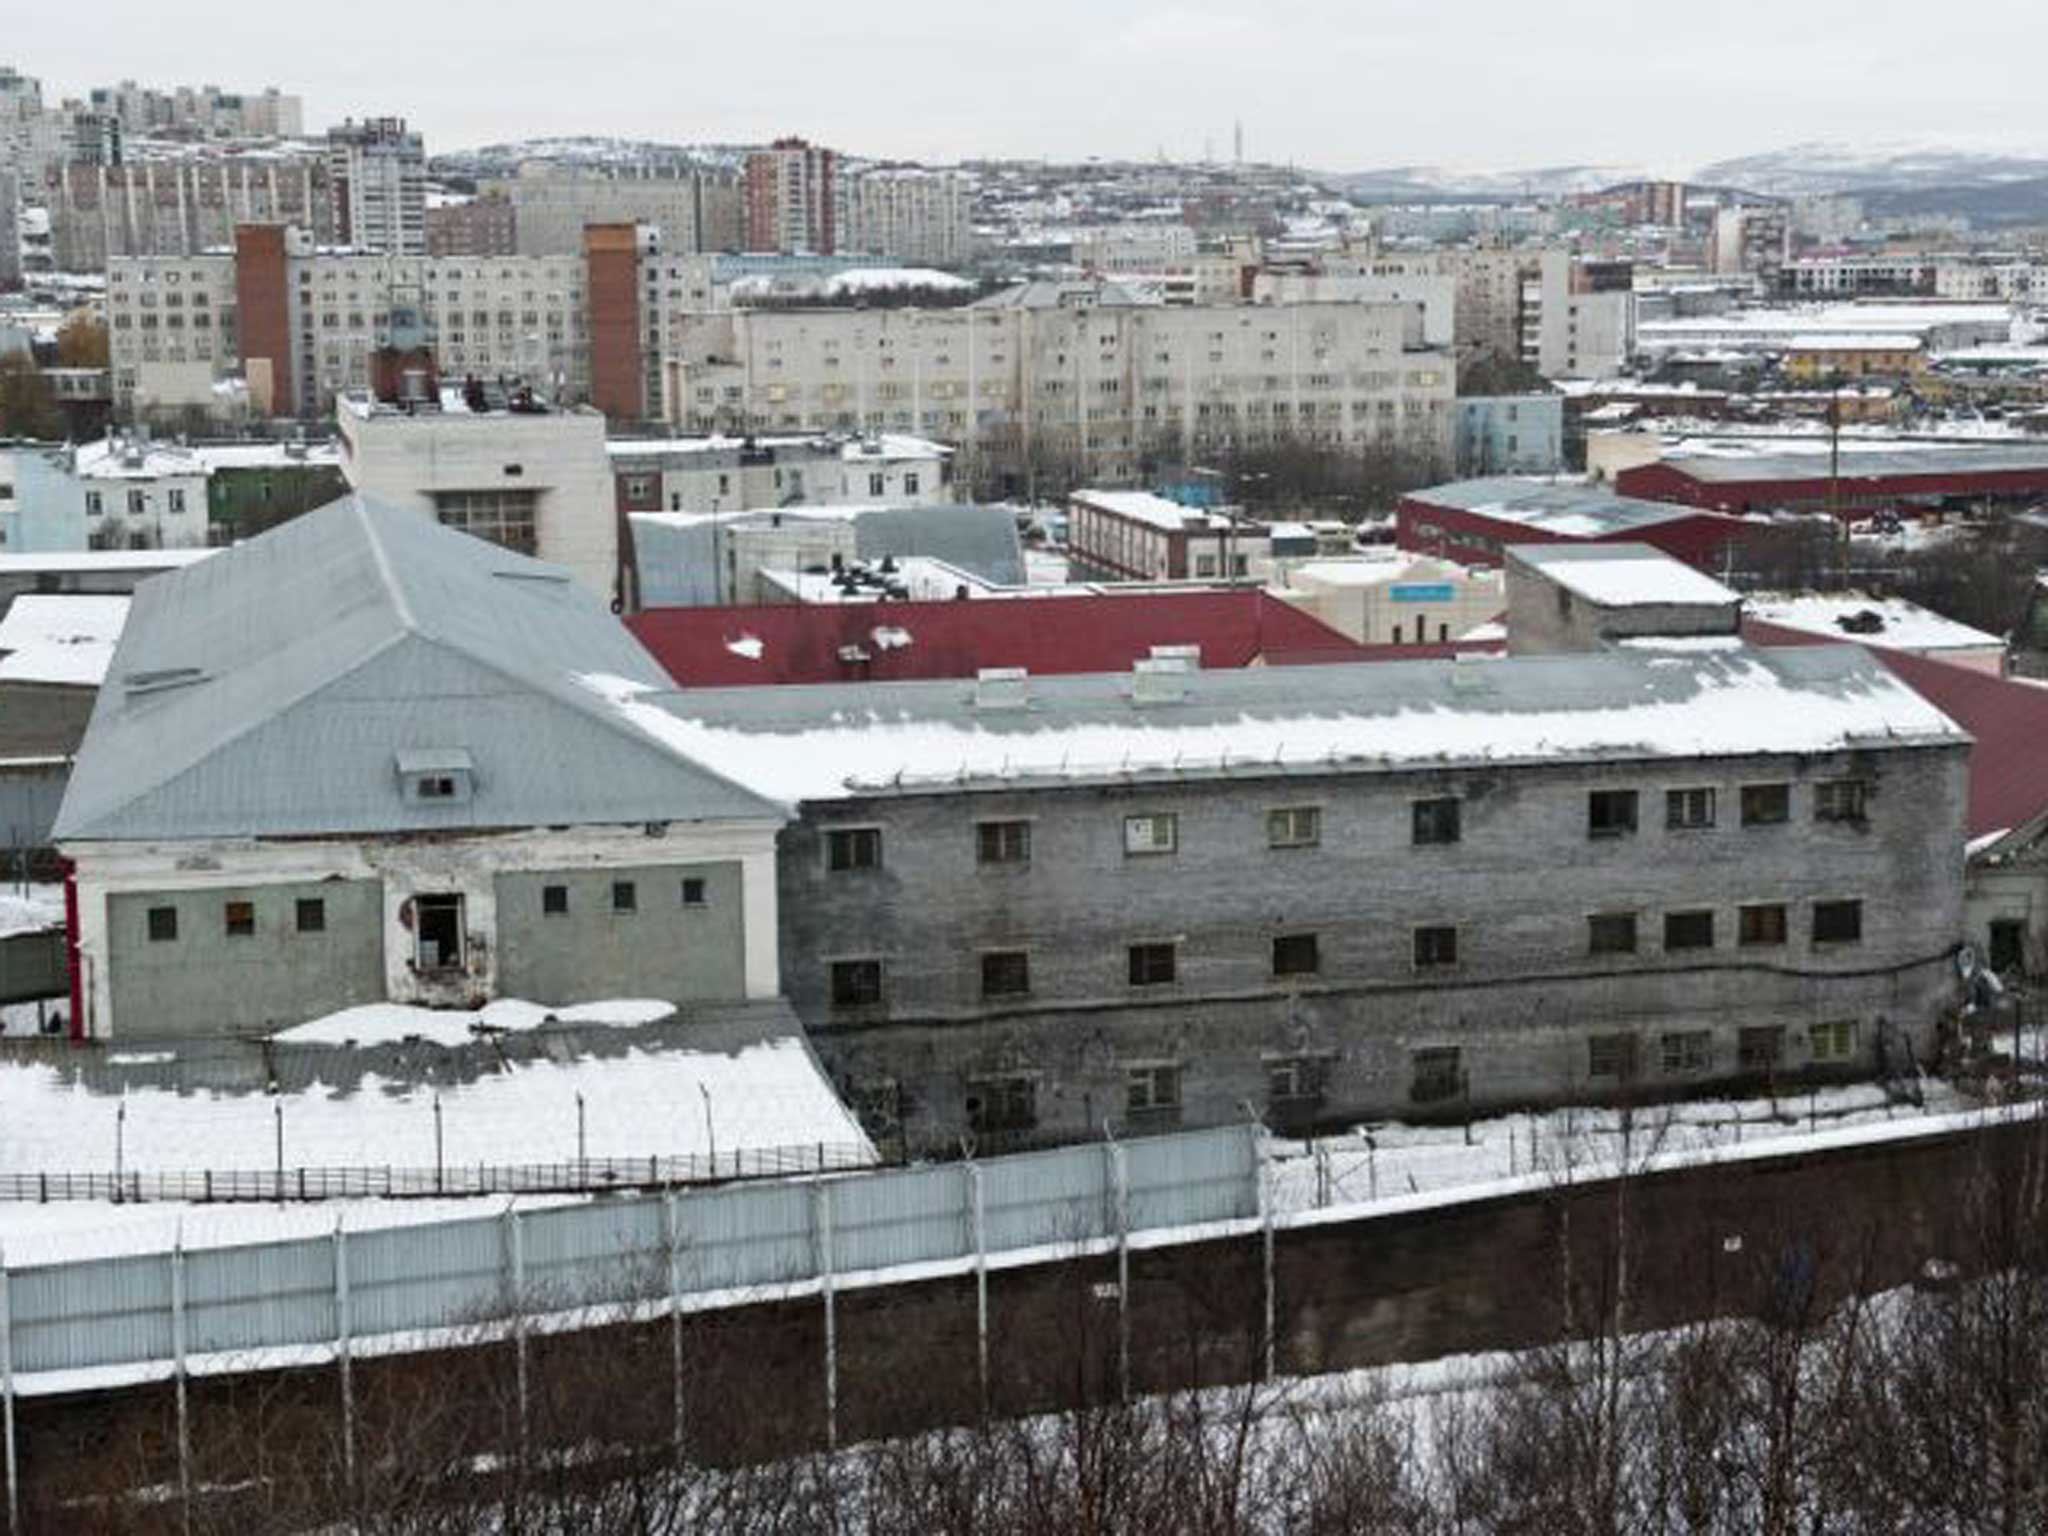 The Murmansk detention centre where 28 Greenpeace activists, a freelance photojournalist and a film maker were being held